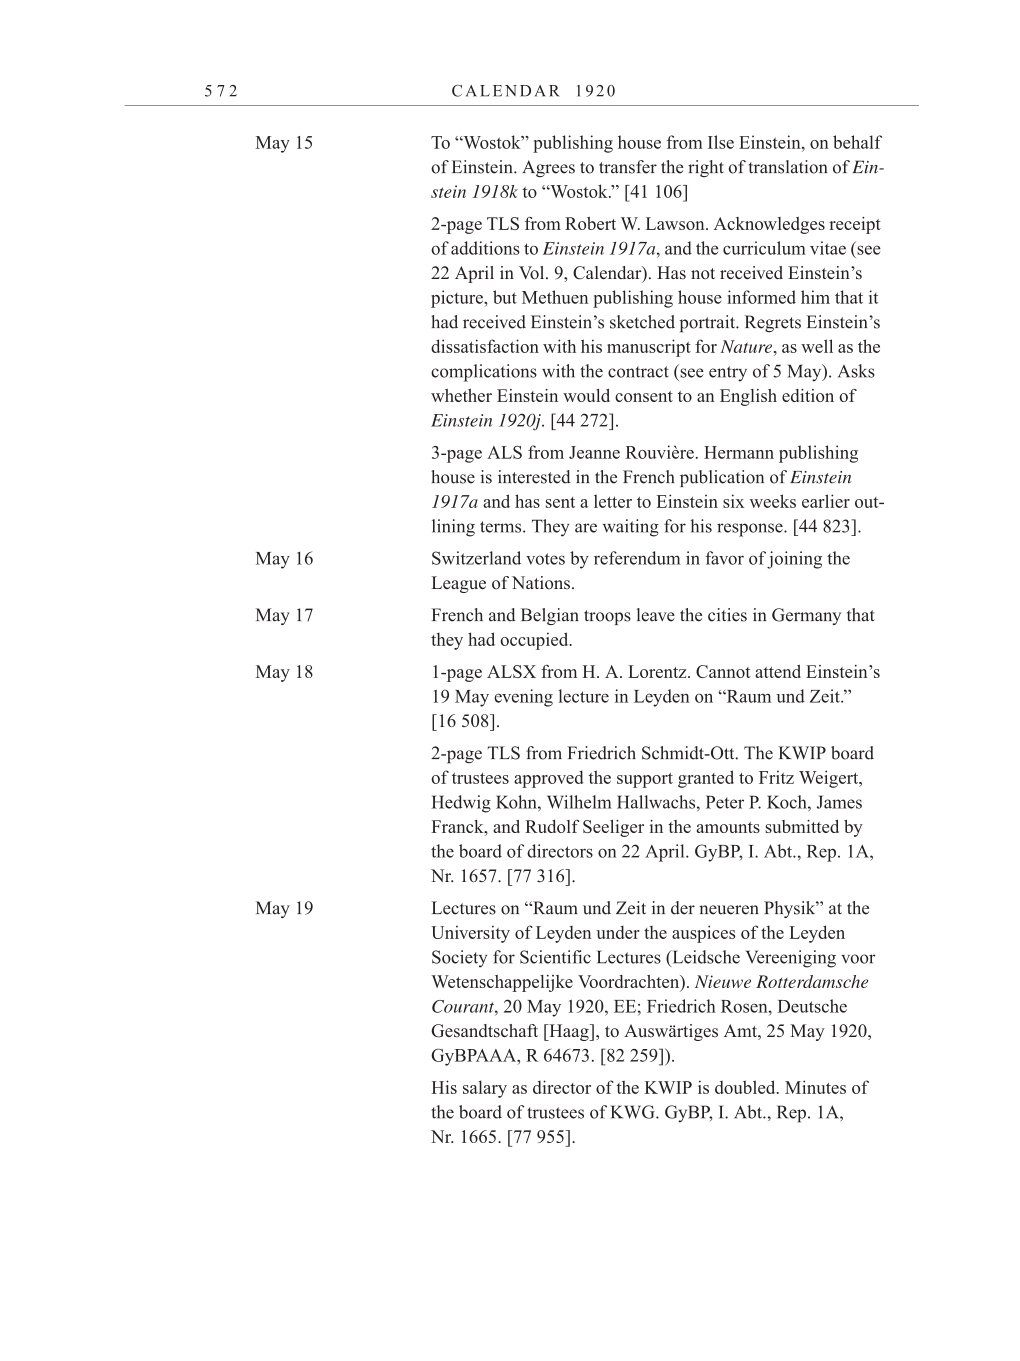 Volume 10: The Berlin Years: Correspondence May-December 1920 / Supplementary Correspondence 1909-1920 page 572